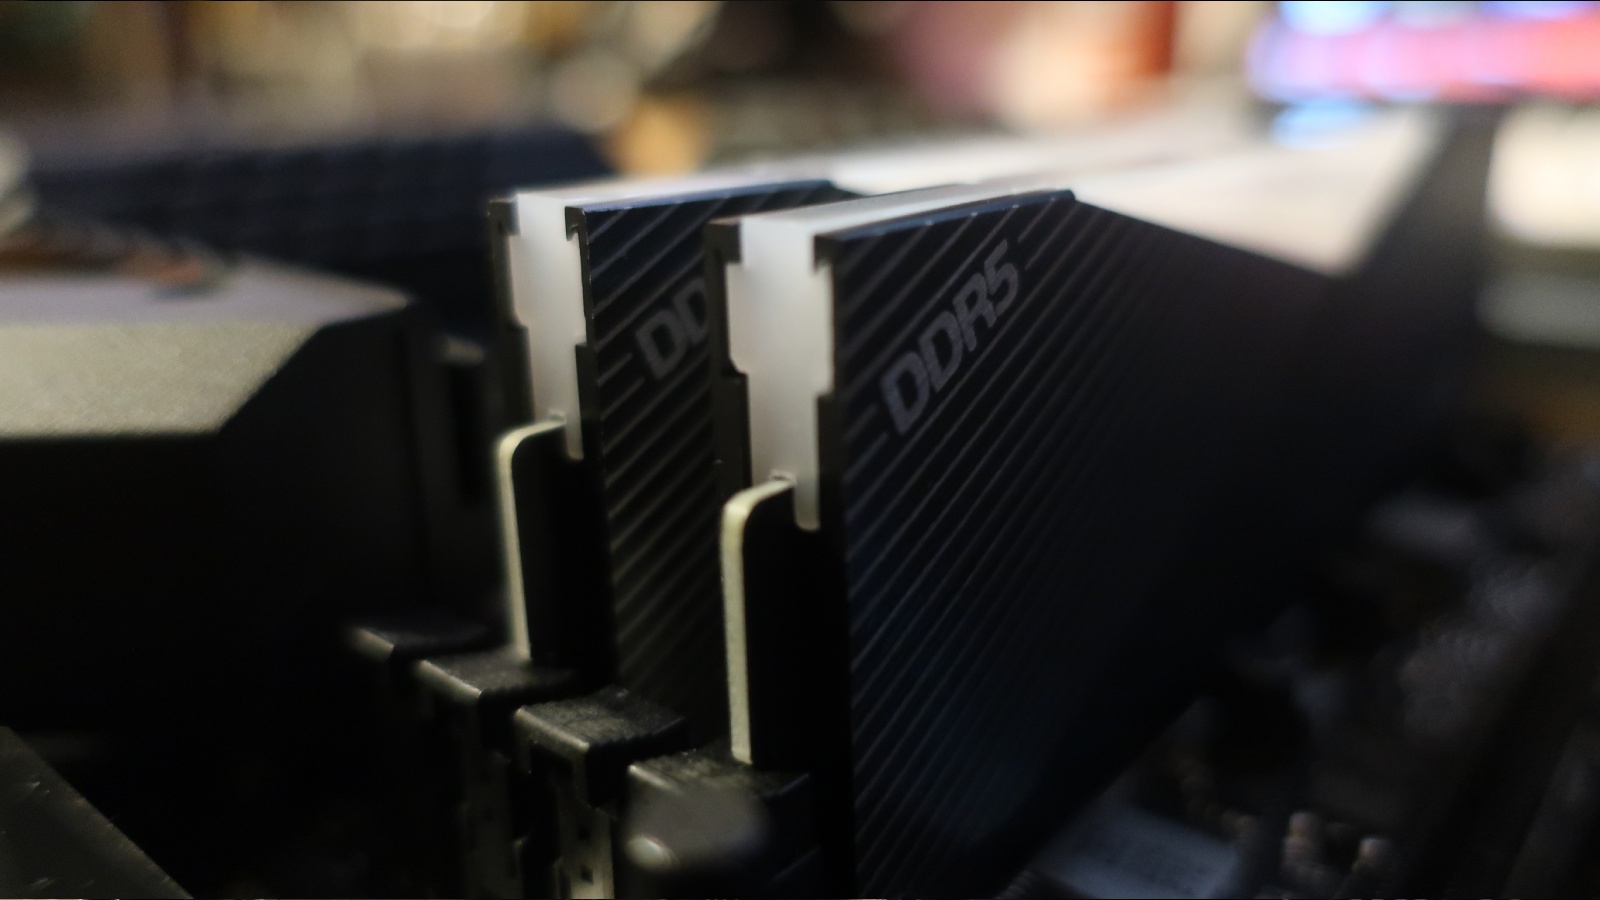 PC gamers rejoice as RAM prices set to plunge to new lows – Egaxo